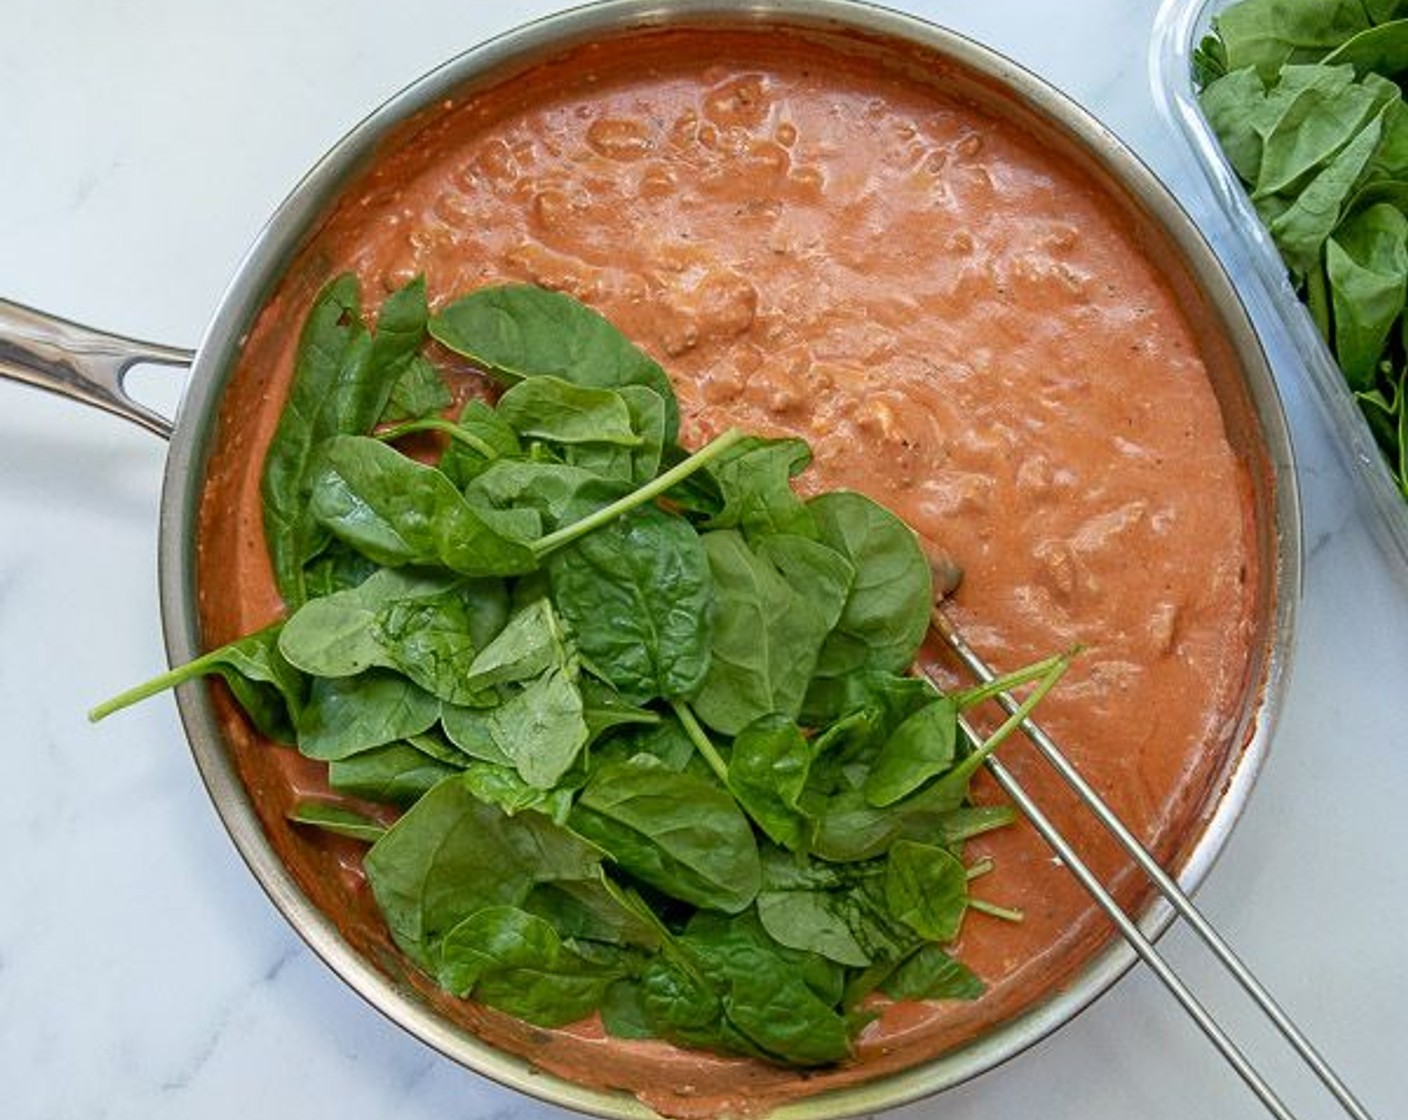 step 3 Reduce heat to medium and add Marinara Sauce (1 jar), scraping up browned bits on the bottom of the pan. Add Philadelphia Original Soft Cheese (1 cup) and stir until melted. Add Fresh Baby Spinach (4 3/4 cups), handfuls at a time, and stir until wilted.